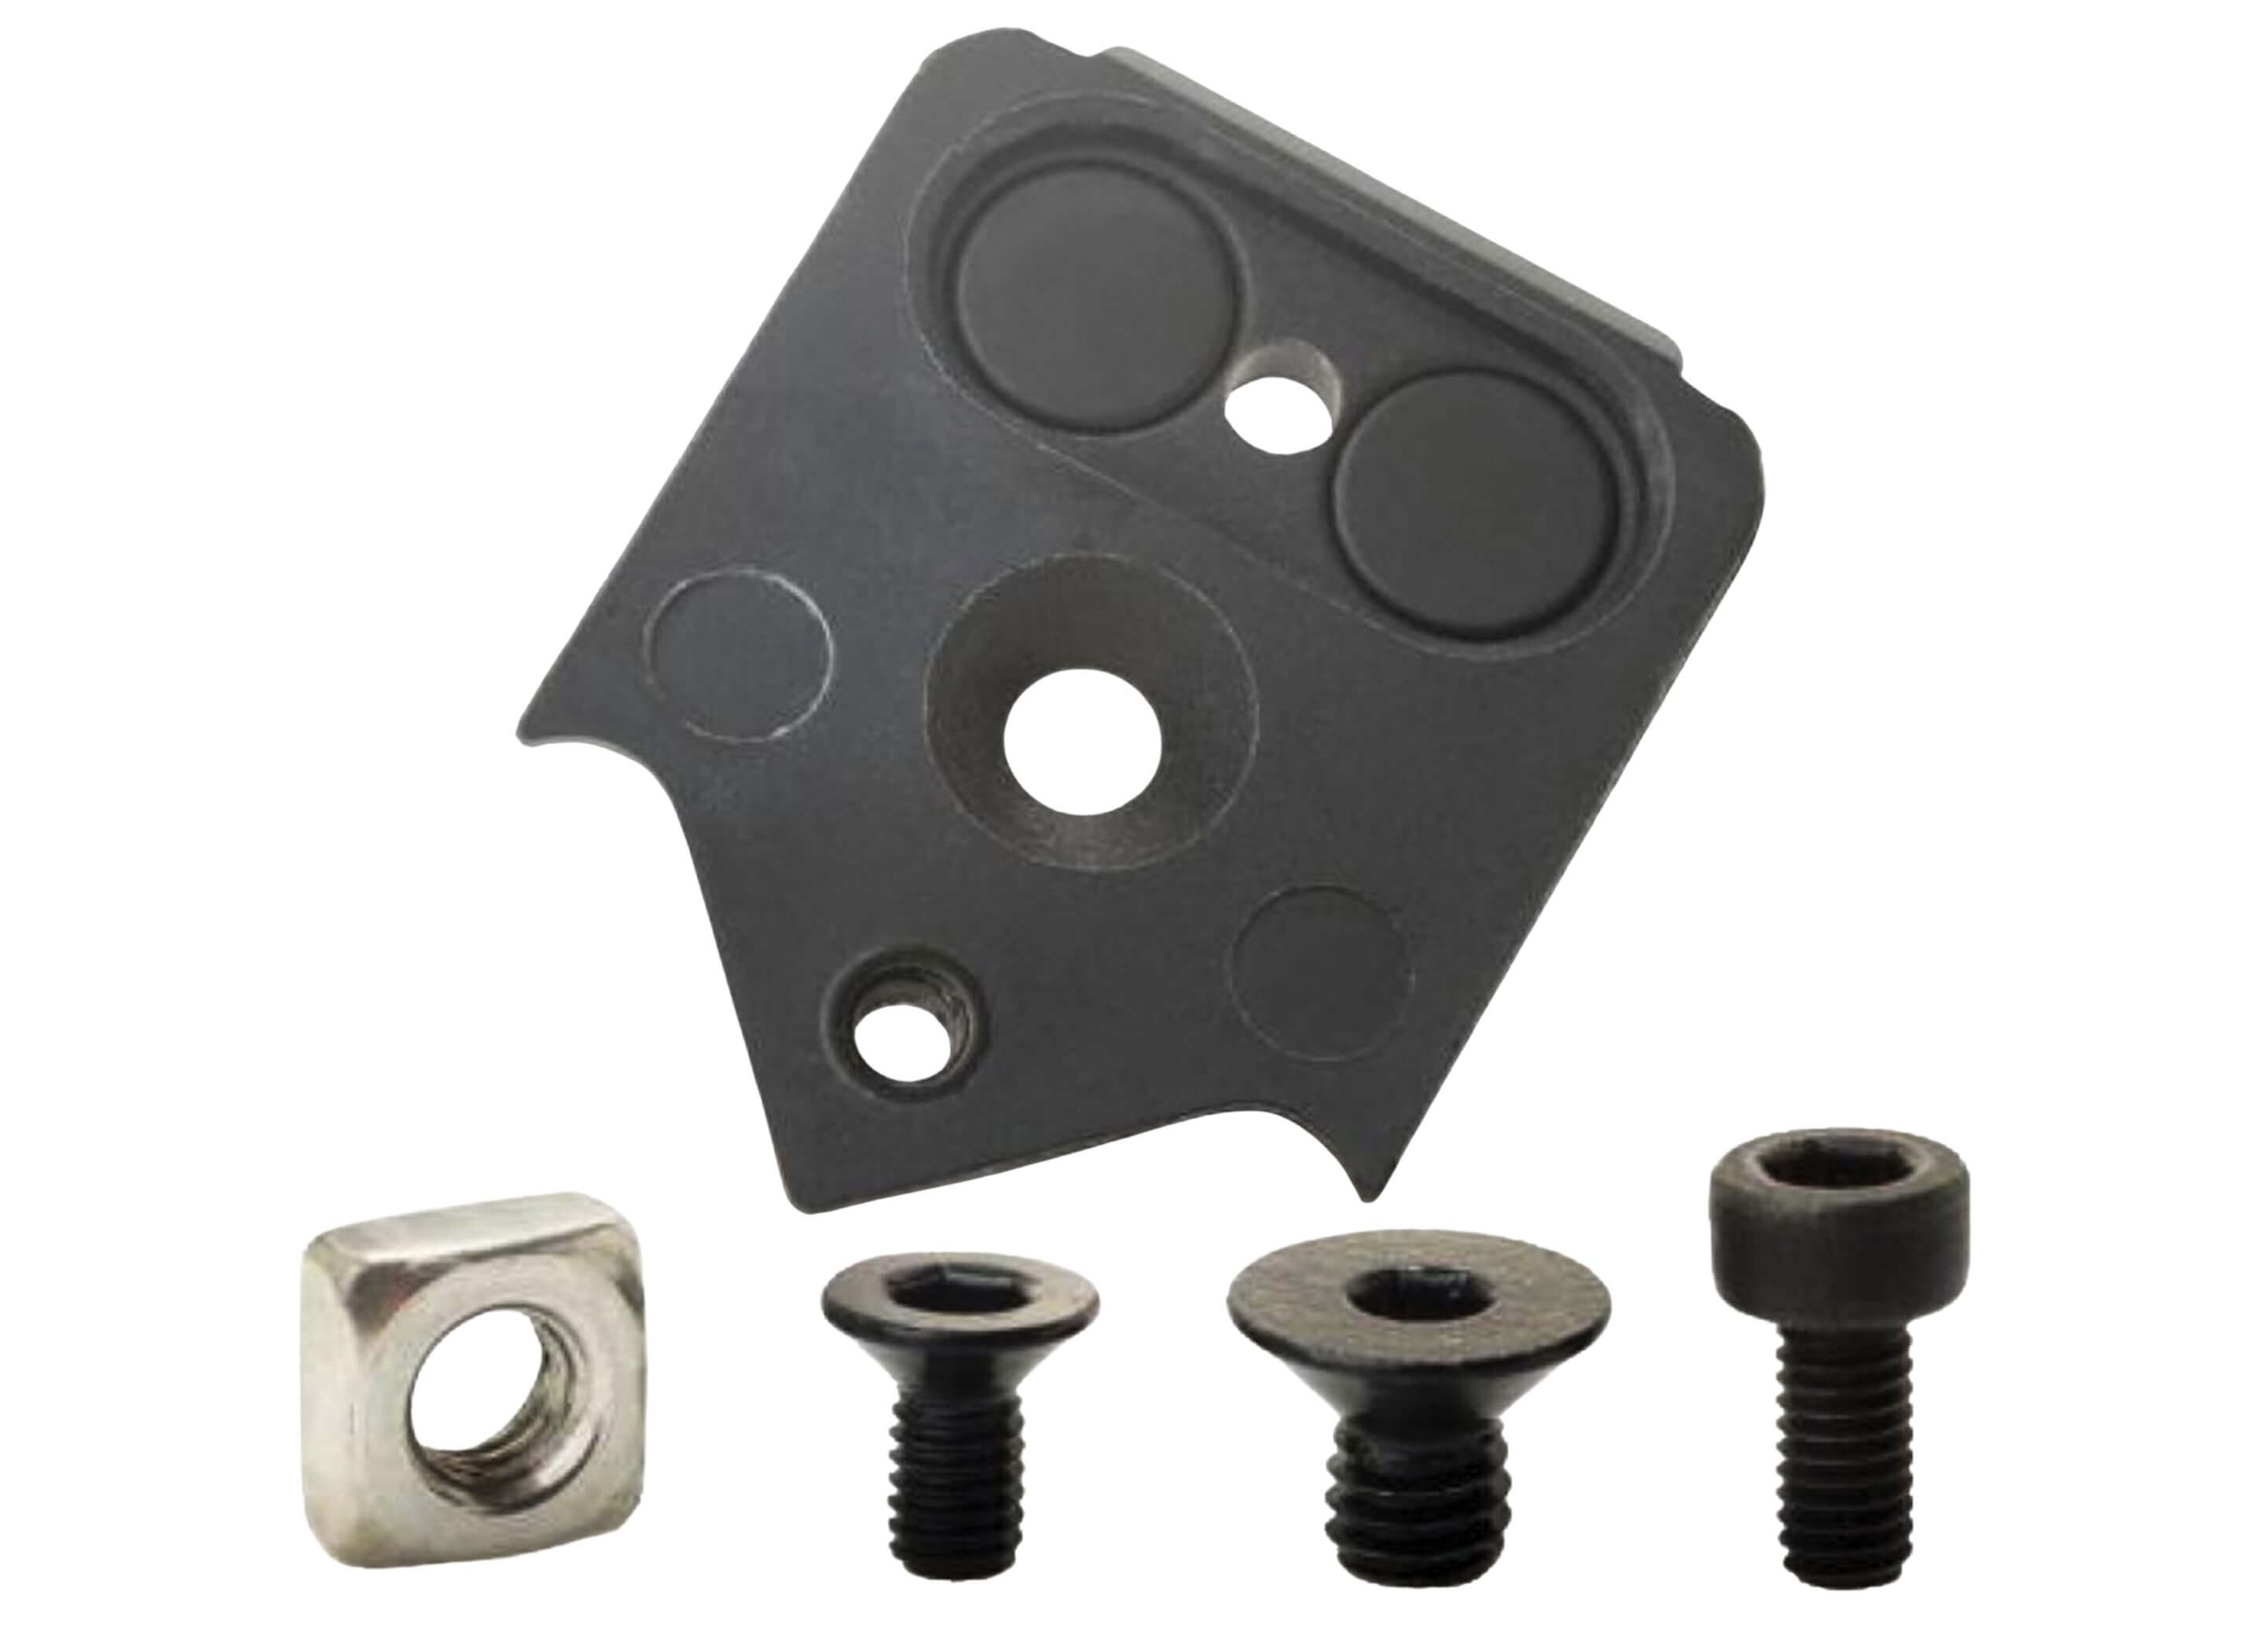 Bosch Kiox Mounting Plate and Screws